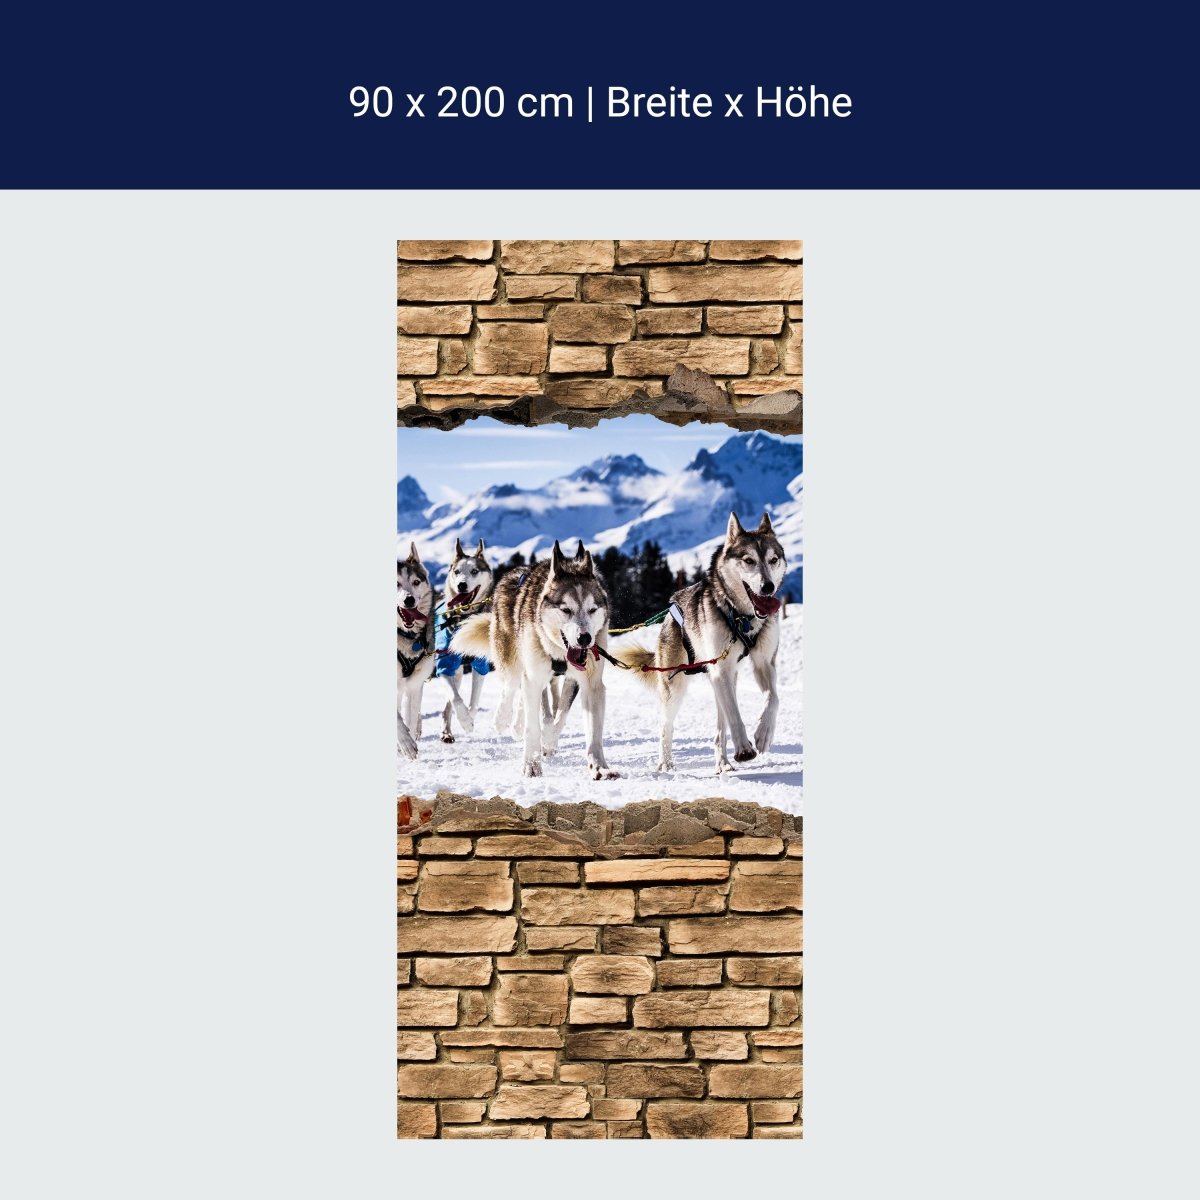 Shower Wall 3D Sled Dogs Racing - Stone Wall M0671